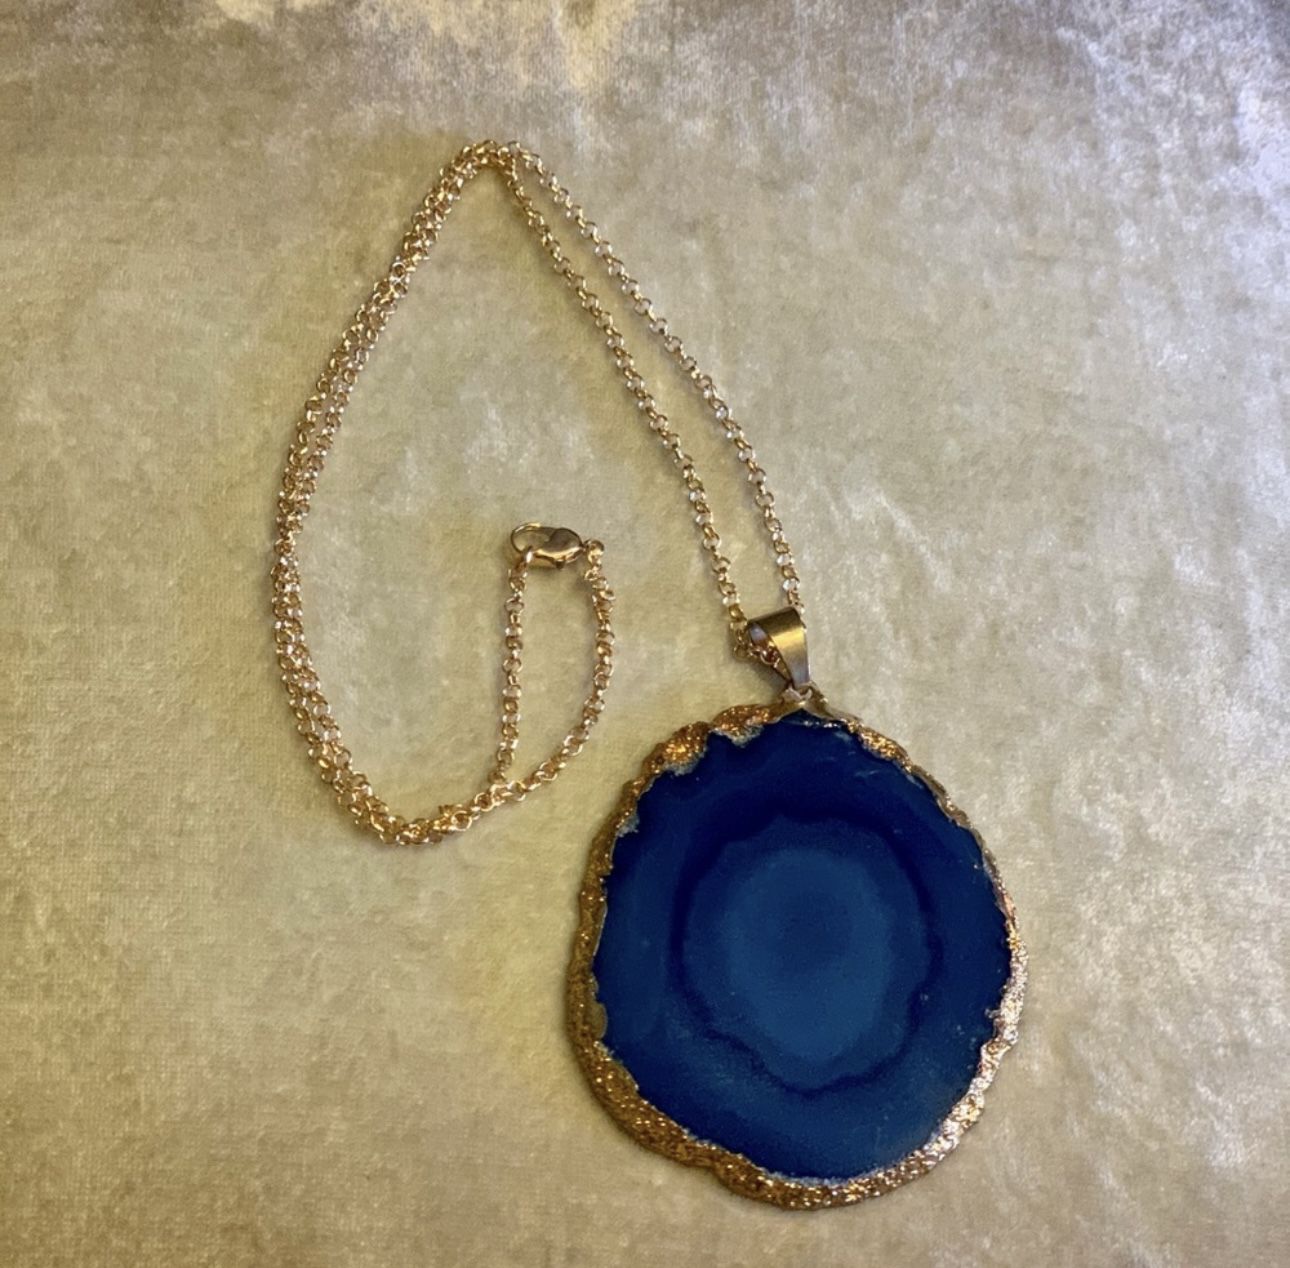 Large Blue, Sliced Agate Pendant With A Brass Gold Plated Chain Necklace